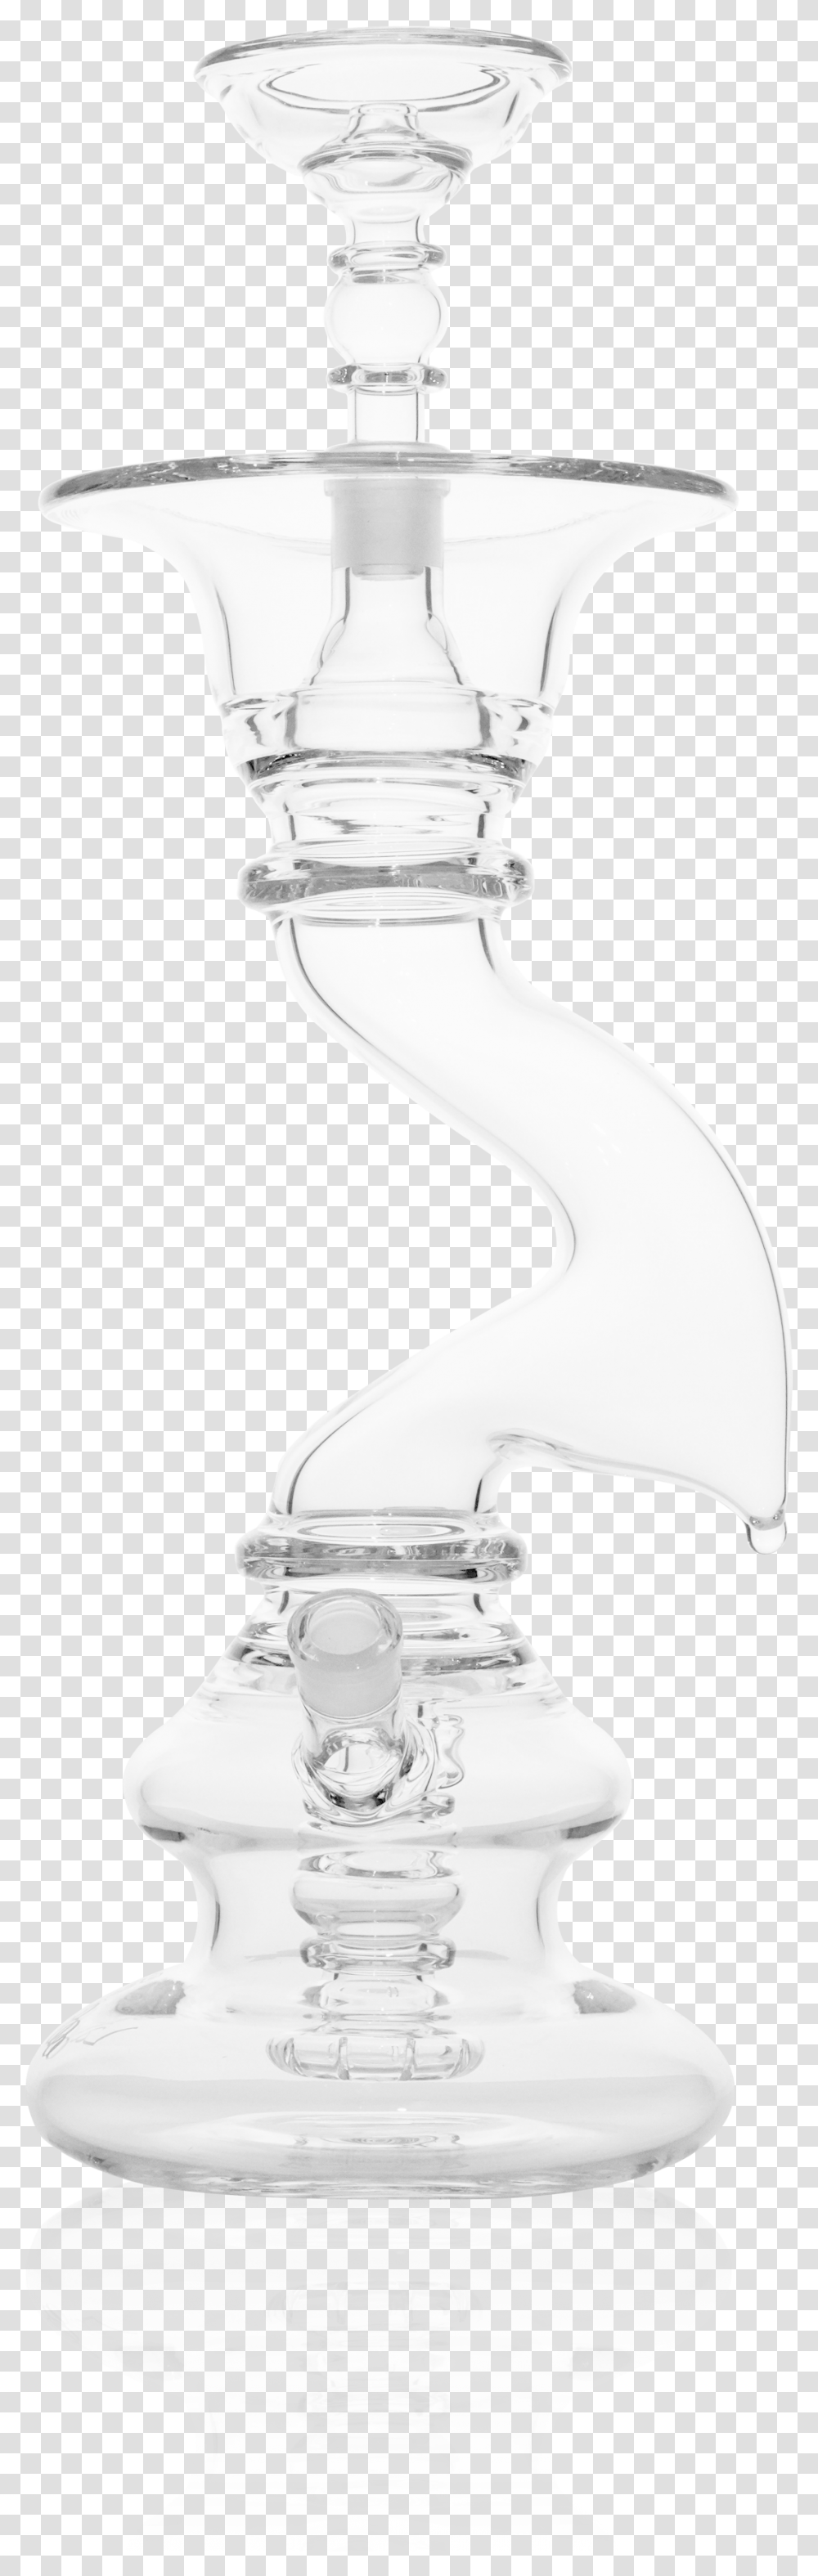 Illustration, Sink Faucet, Chess, Game, Indoors Transparent Png